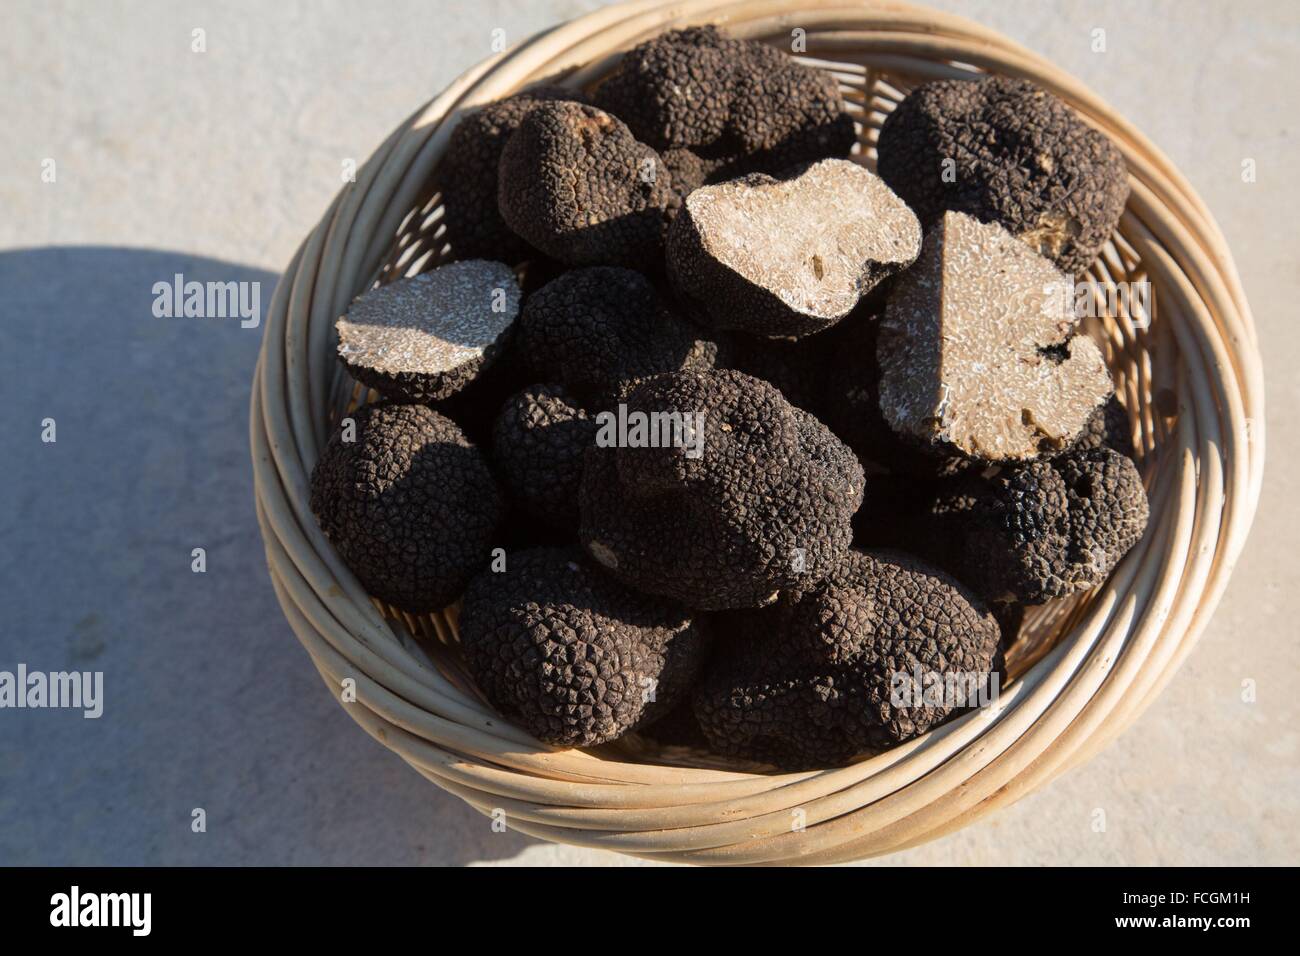 THE BLACK TRUFFLE, PUJAUT, (30), GARD, LANGUEDOC-ROUSSILLON, FRANCE Stock Photo